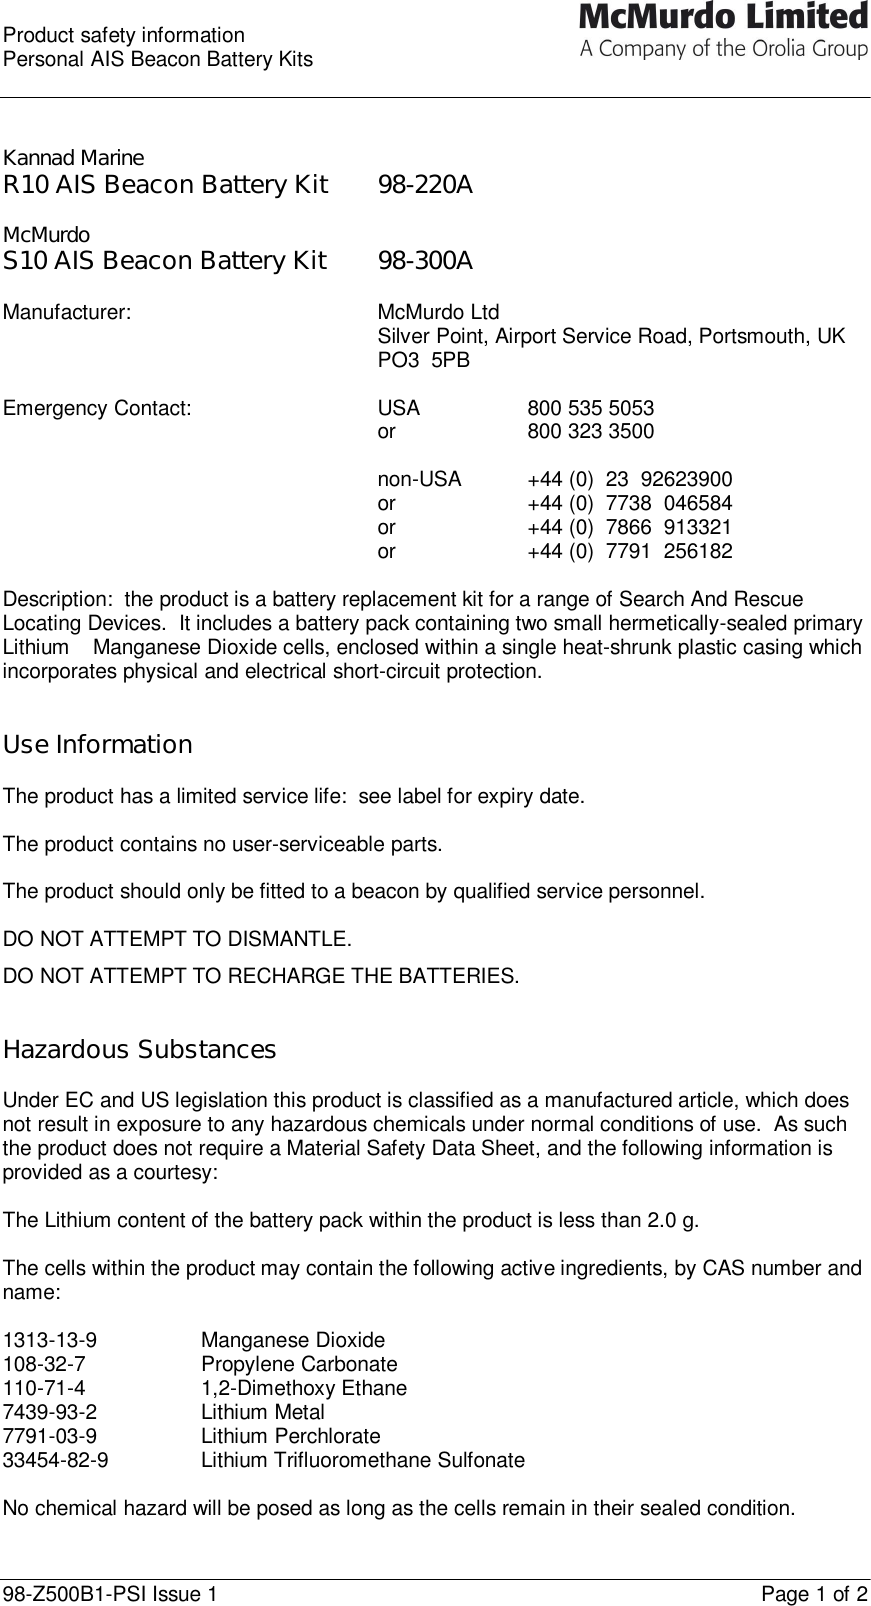  Product safety information Personal AIS Beacon Battery Kits  98-Z500B1-PSI Issue 1    Page 1 of 2   Kannad Marine R10 AIS Beacon Battery Kit 98-220A  McMurdo S10 AIS Beacon Battery Kit 98-300A  Manufacturer: McMurdo Ltd Silver Point, Airport Service Road, Portsmouth, UK PO3  5PB  Emergency Contact:   USA    800 535 5053   or    800 323 3500       non-USA +44 (0)  23  92623900      or    +44 (0)  7738  046584      or    +44 (0)  7866  913321      or    +44 (0)  7791  256182    Description:  the product is a battery replacement kit for a range of Search And Rescue Locating Devices.  It includes a battery pack containing two small hermetically-sealed primary Lithium – Manganese Dioxide cells, enclosed within a single heat-shrunk plastic casing which incorporates physical and electrical short-circuit protection.   Use Information  The product has a limited service life:  see label for expiry date.  The product contains no user-serviceable parts.  The product should only be fitted to a beacon by qualified service personnel.  DO NOT ATTEMPT TO DISMANTLE. DO NOT ATTEMPT TO RECHARGE THE BATTERIES.   Hazardous Substances   Under EC and US legislation this product is classified as a manufactured article, which does not result in exposure to any hazardous chemicals under normal conditions of use.  As such the product does not require a Material Safety Data Sheet, and the following information is provided as a courtesy:  The Lithium content of the battery pack within the product is less than 2.0 g.  The cells within the product may contain the following active ingredients, by CAS number and name:  1313-13-9 Manganese Dioxide 108-32-7 Propylene Carbonate 110-71-4 1,2-Dimethoxy Ethane 7439-93-2 Lithium Metal 7791-03-9 Lithium Perchlorate 33454-82-9 Lithium Trifluoromethane Sulfonate  No chemical hazard will be posed as long as the cells remain in their sealed condition. 